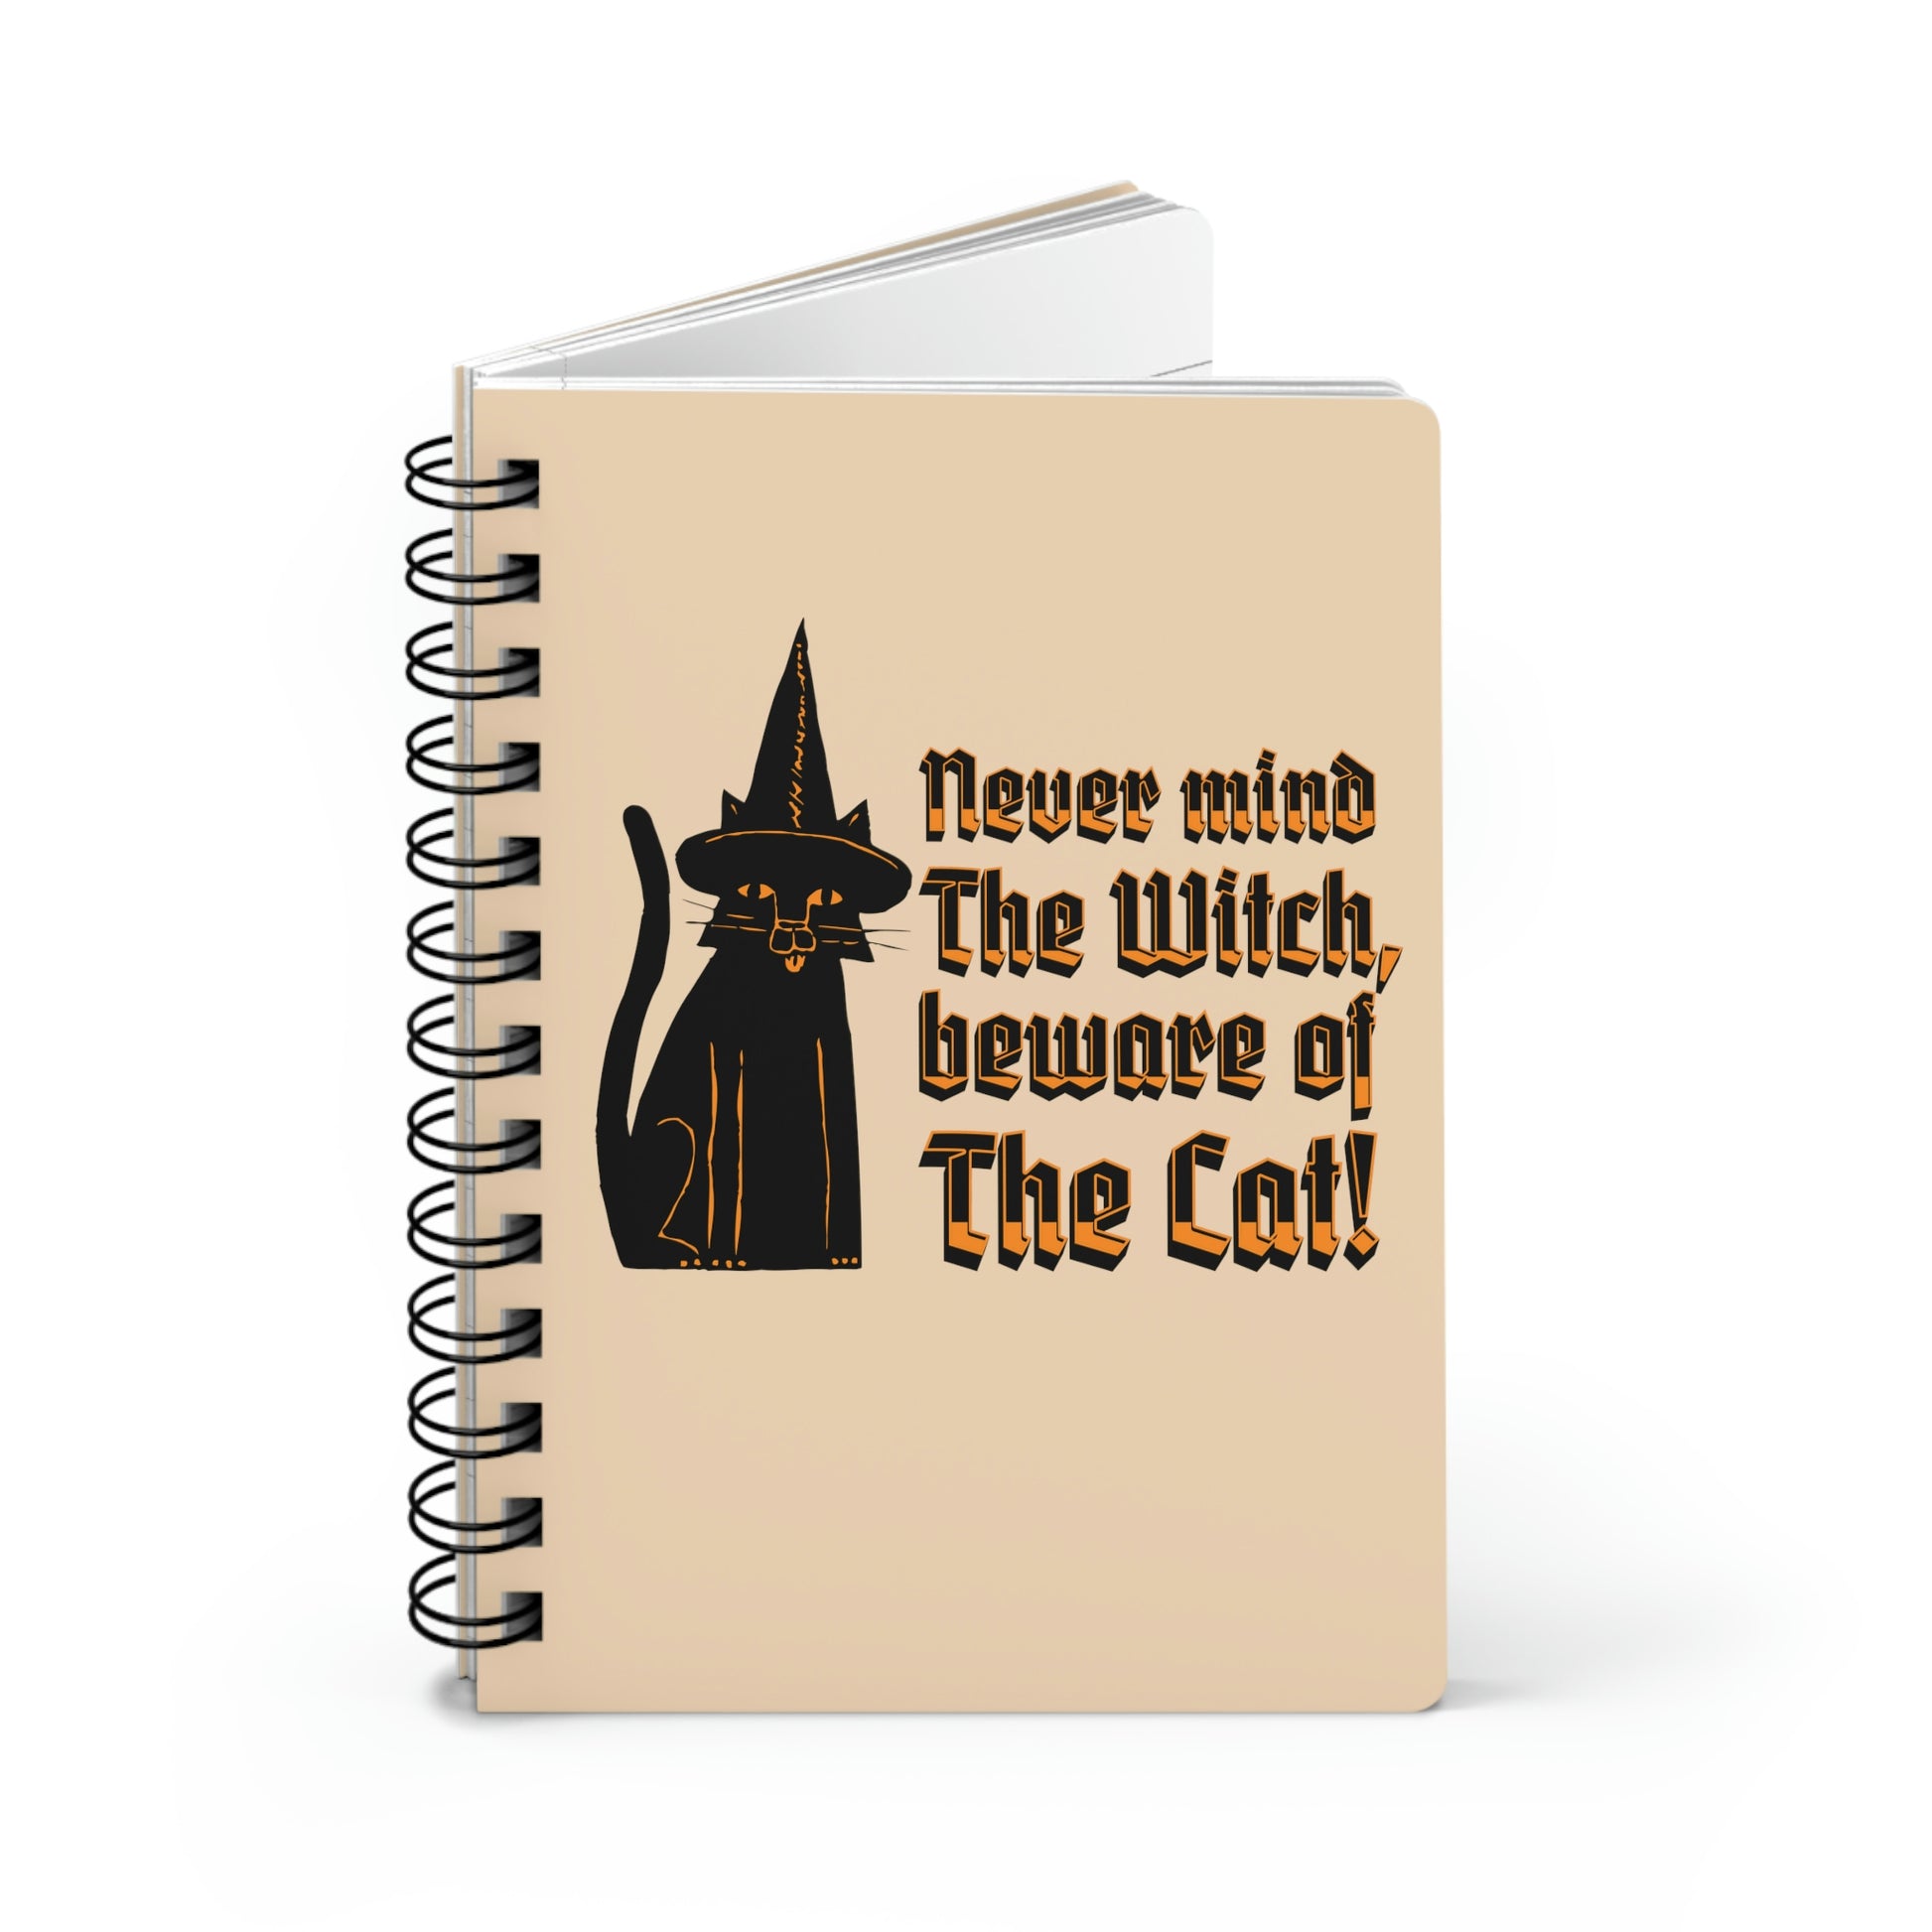 Cat familiar Spiral Bound Journal, witchy cat notebook, witchcraft journal, witchy cat quote notebook, pagan notebook, fantasy notebook